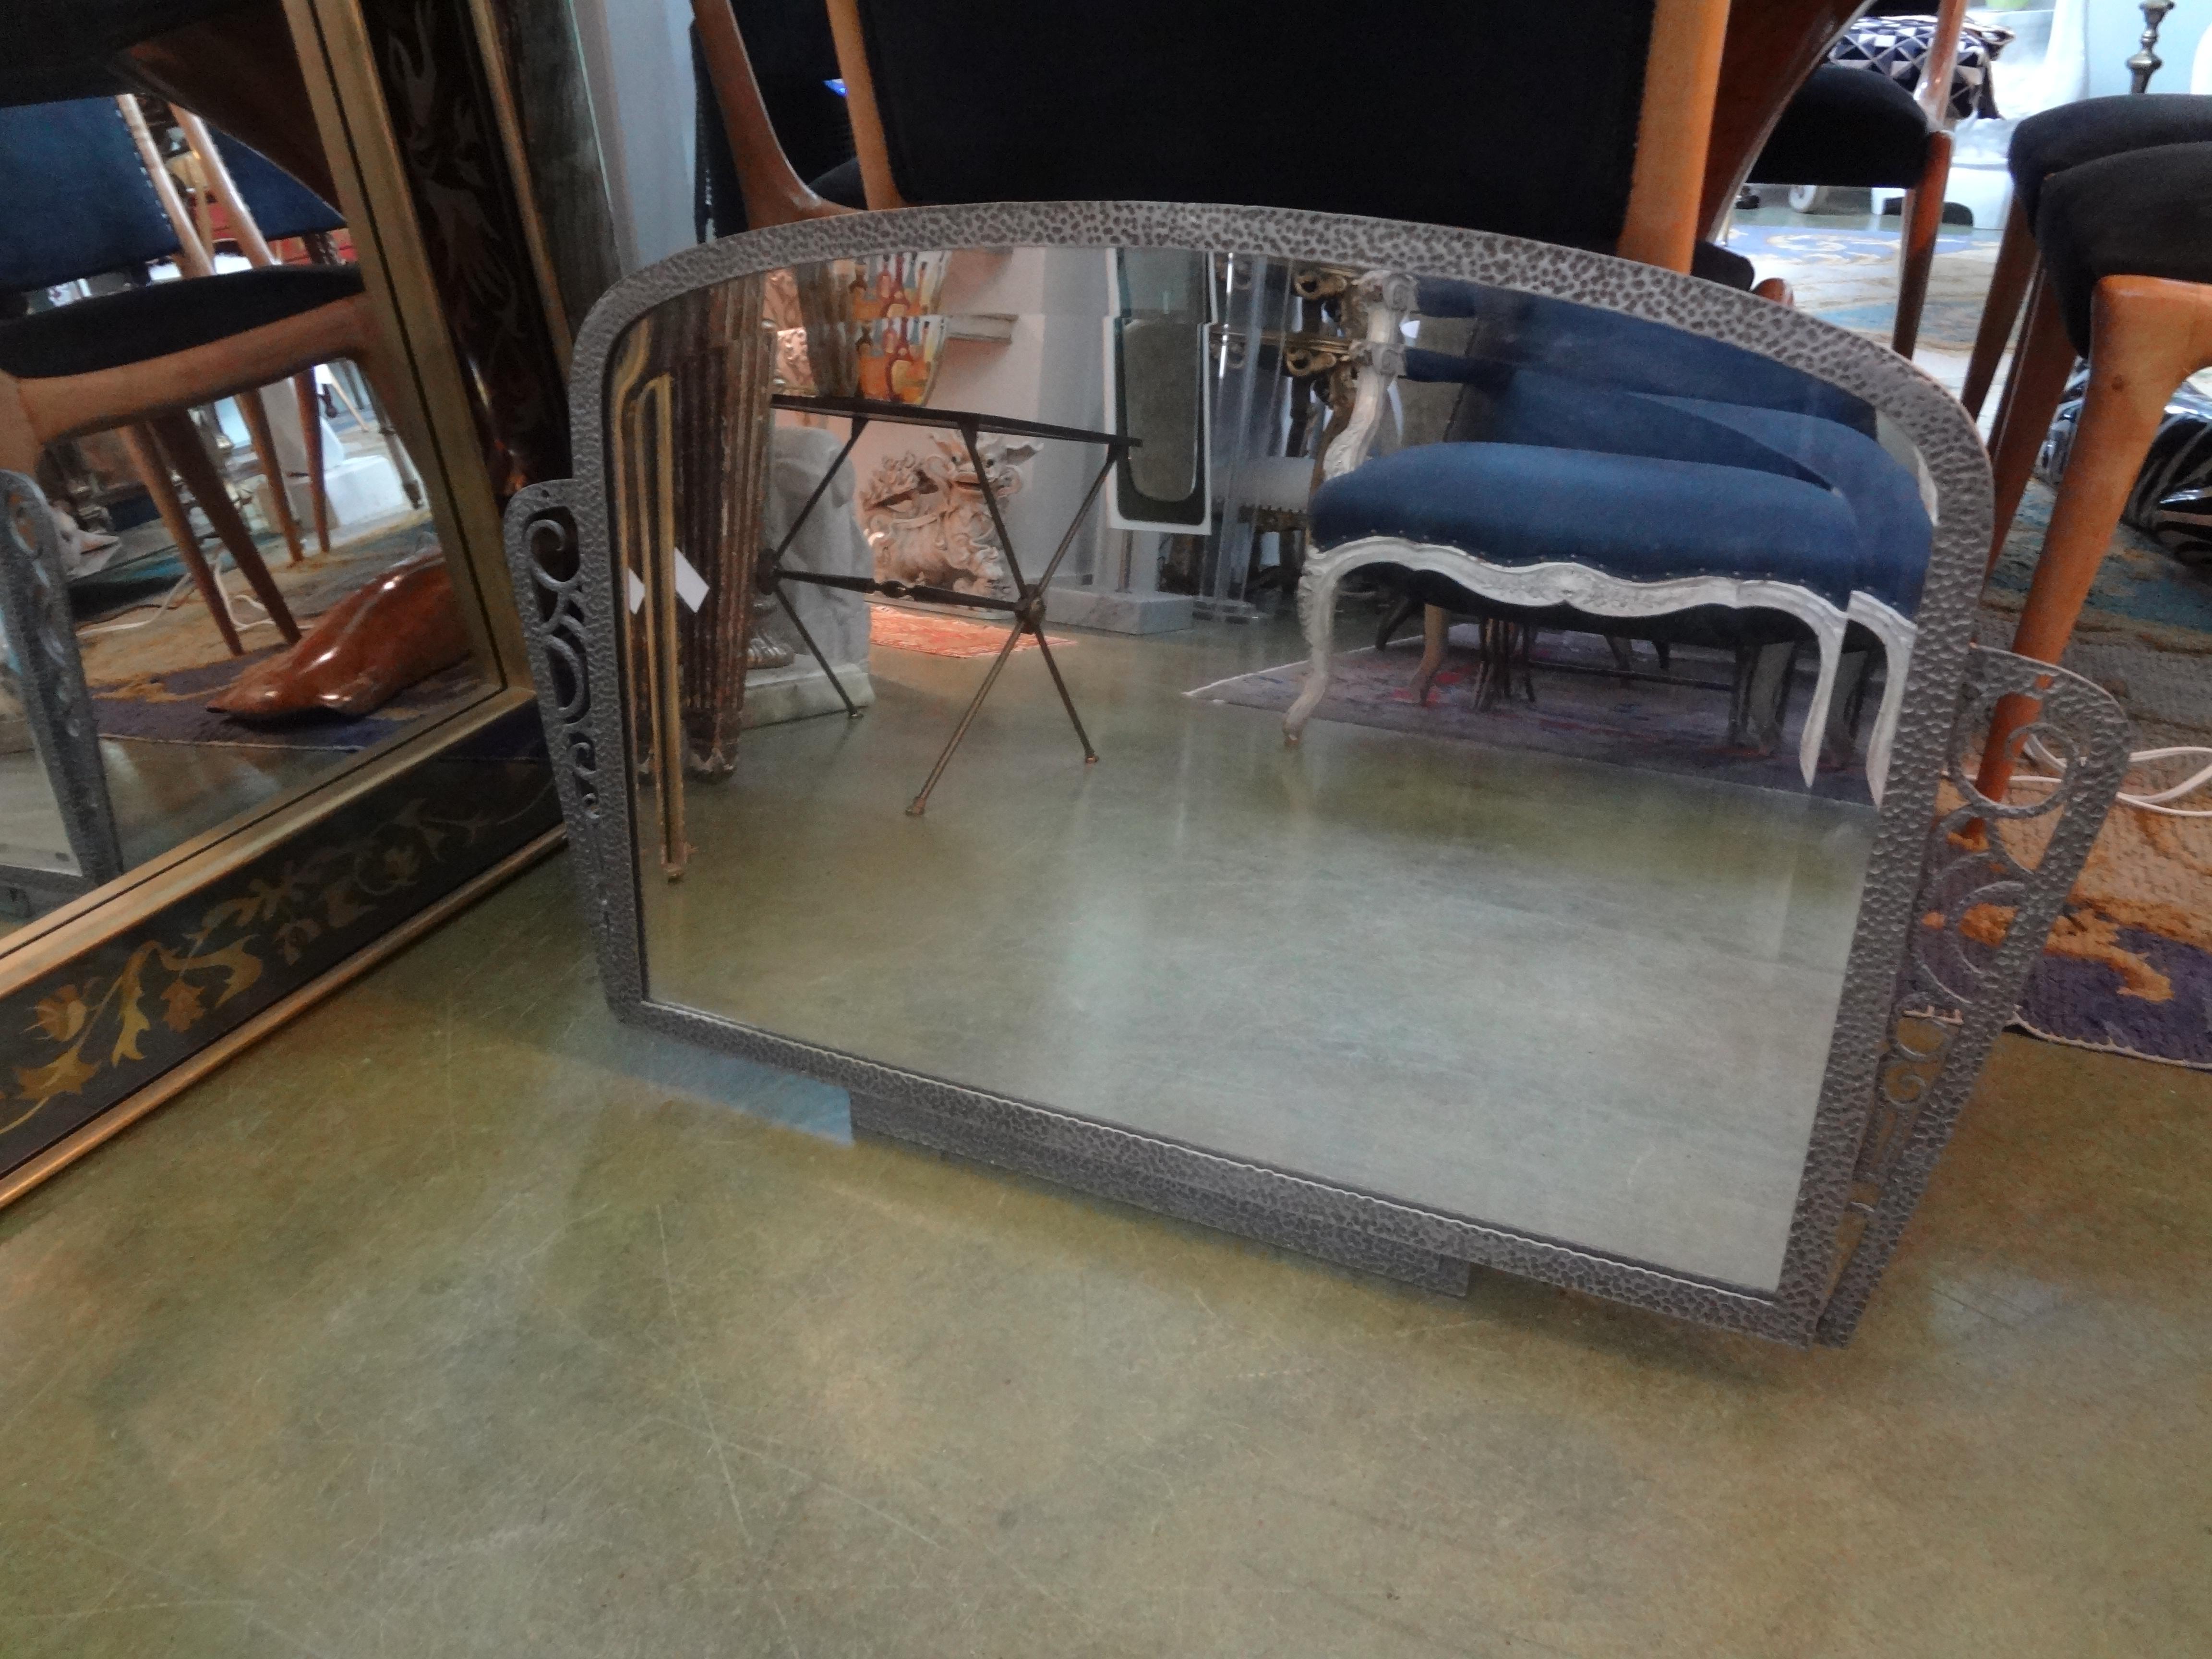 French Art Deco silvered wrought iron beveled mirror.
Handsome French Art Deco Edgar Brandt inspired silvered horizontal wrought iron beveled mirror. This shapely French Art Deco Mirror has a beautiful hammered finish.